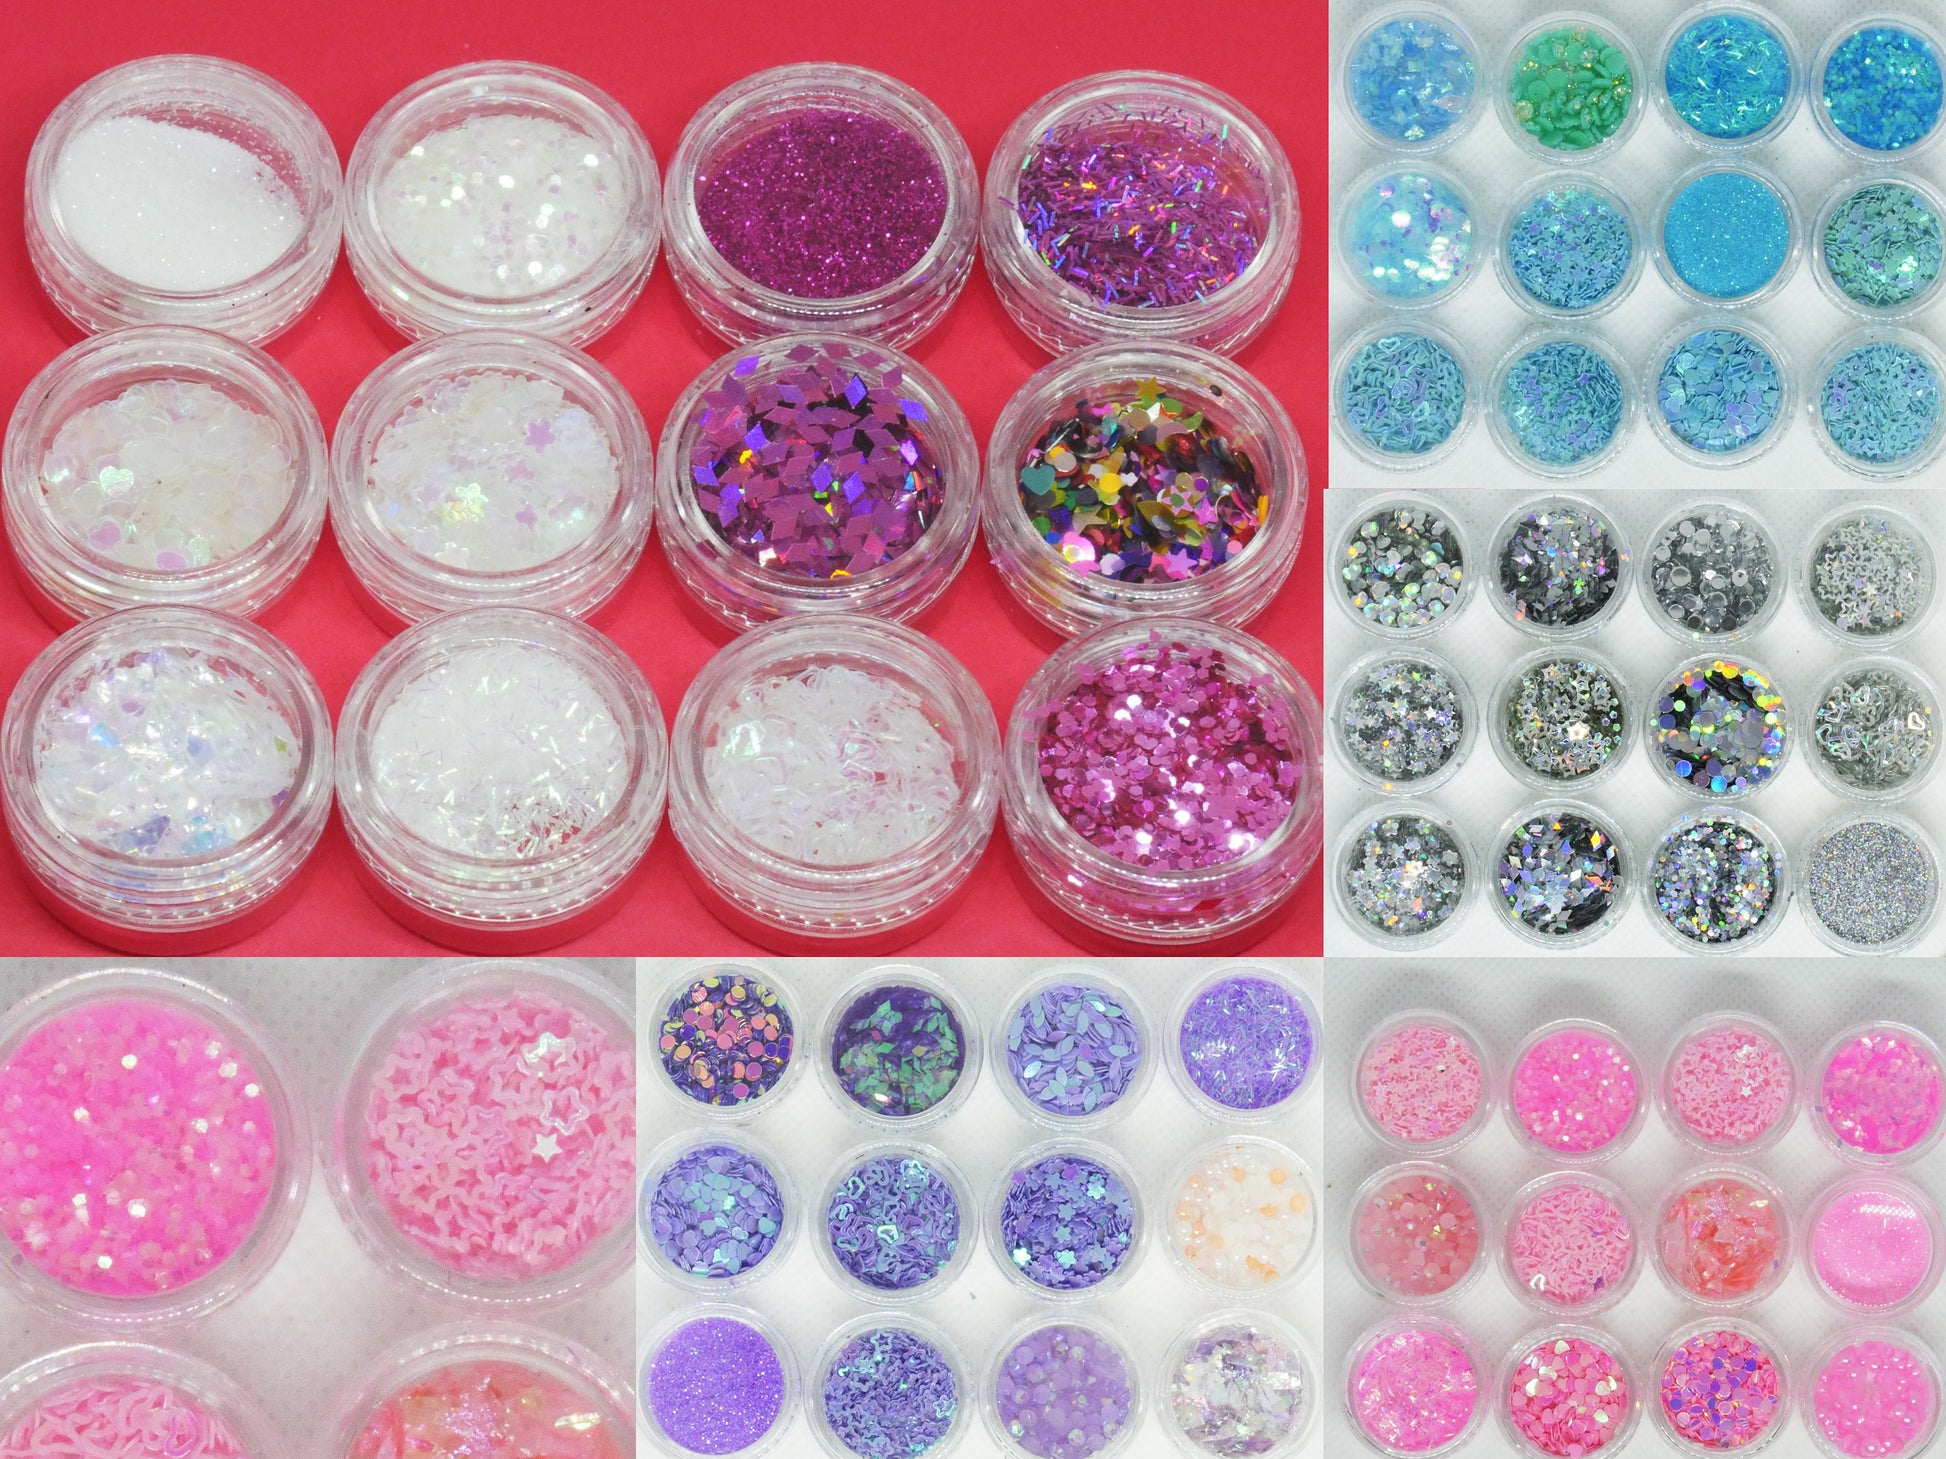 12 jars Mixed Starry Holographic Laser Glitter Dust Nail Powder Sequins Manicure Nail Art DIY Sparkles Decor for UV gel make up crafts